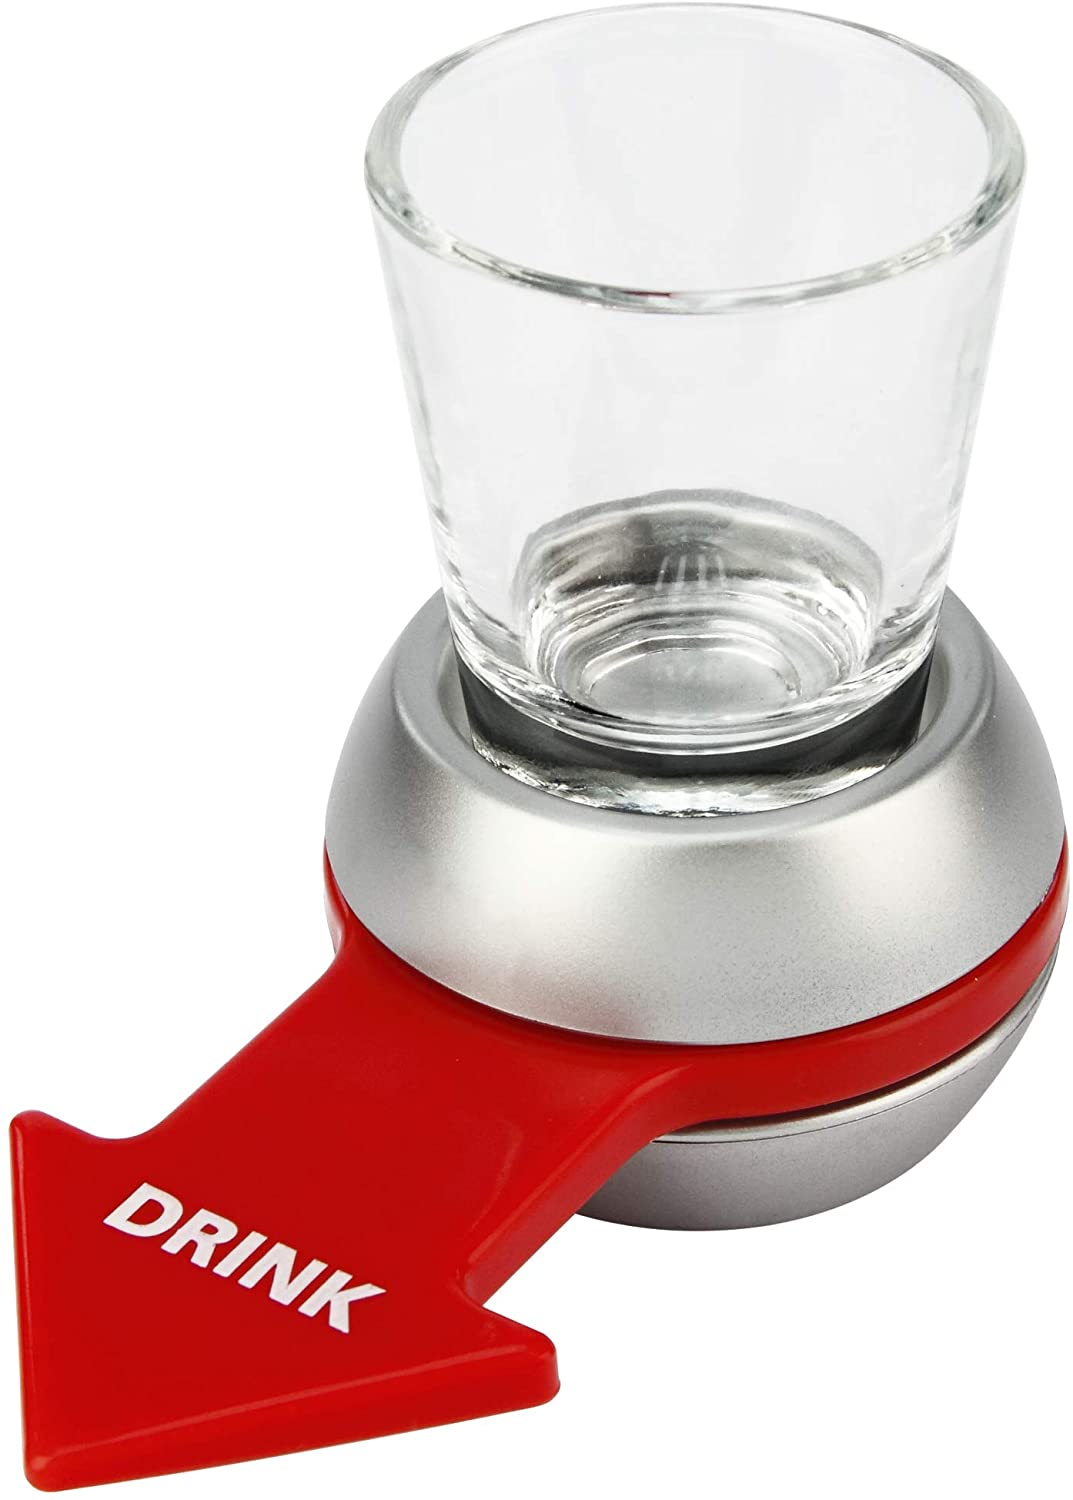 Original Spin the Shot - Fun Party Drinking Game - Includes 2 Ounce Shot Glass